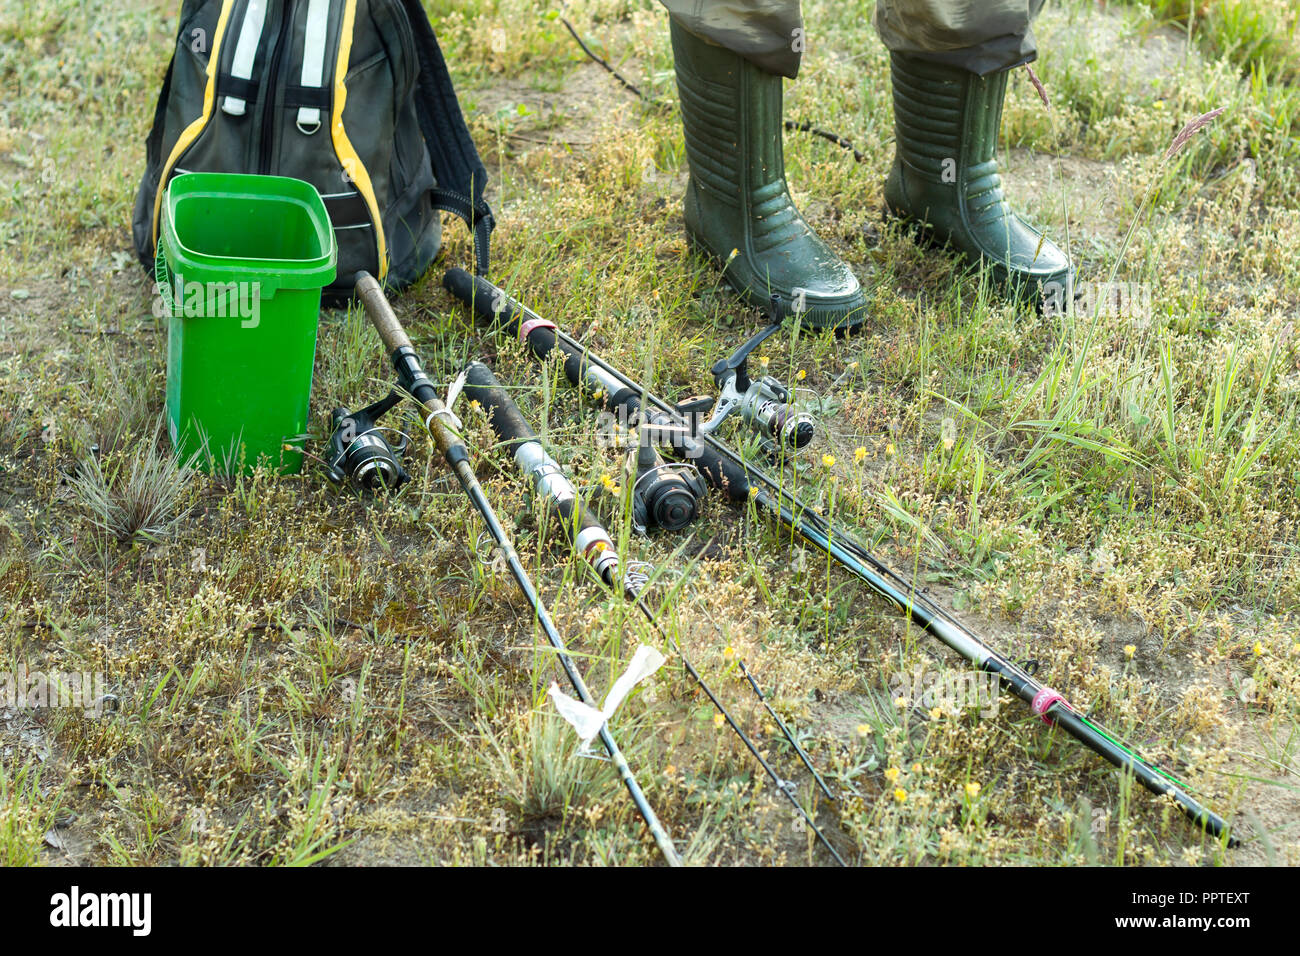 https://c8.alamy.com/comp/PPTEXT/fishing-rods-are-lying-on-the-ground-an-angler-in-rubber-boots-stands-next-to-him-PPTEXT.jpg